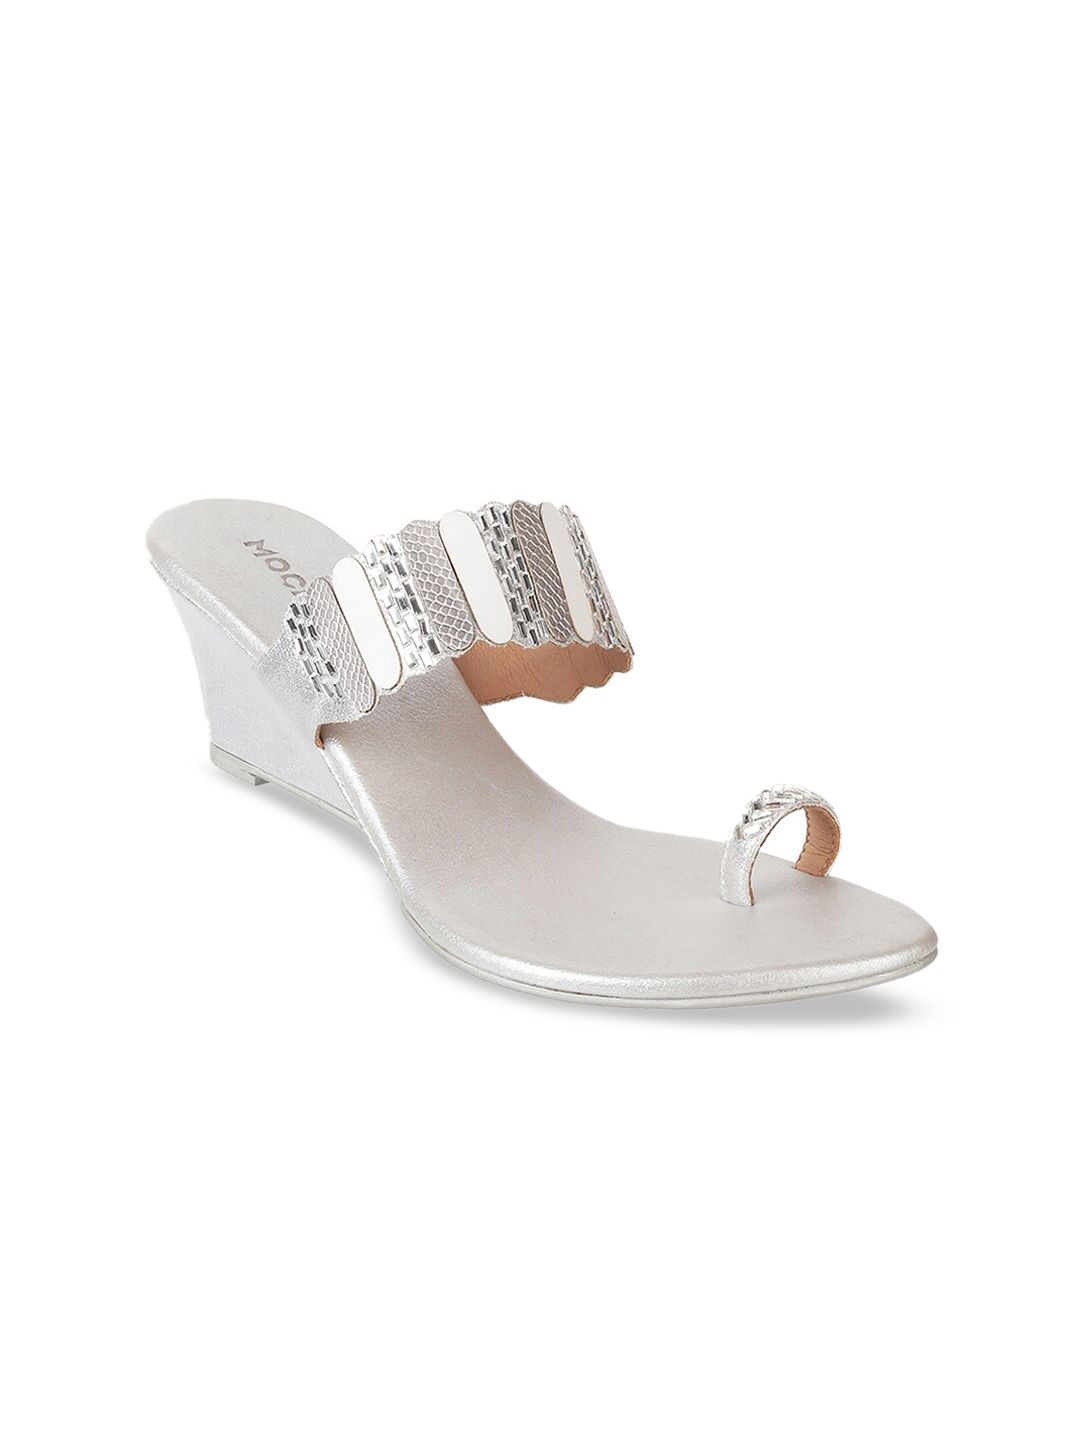 Mochi Women Silver-Toned Embellished Wedges Price in India